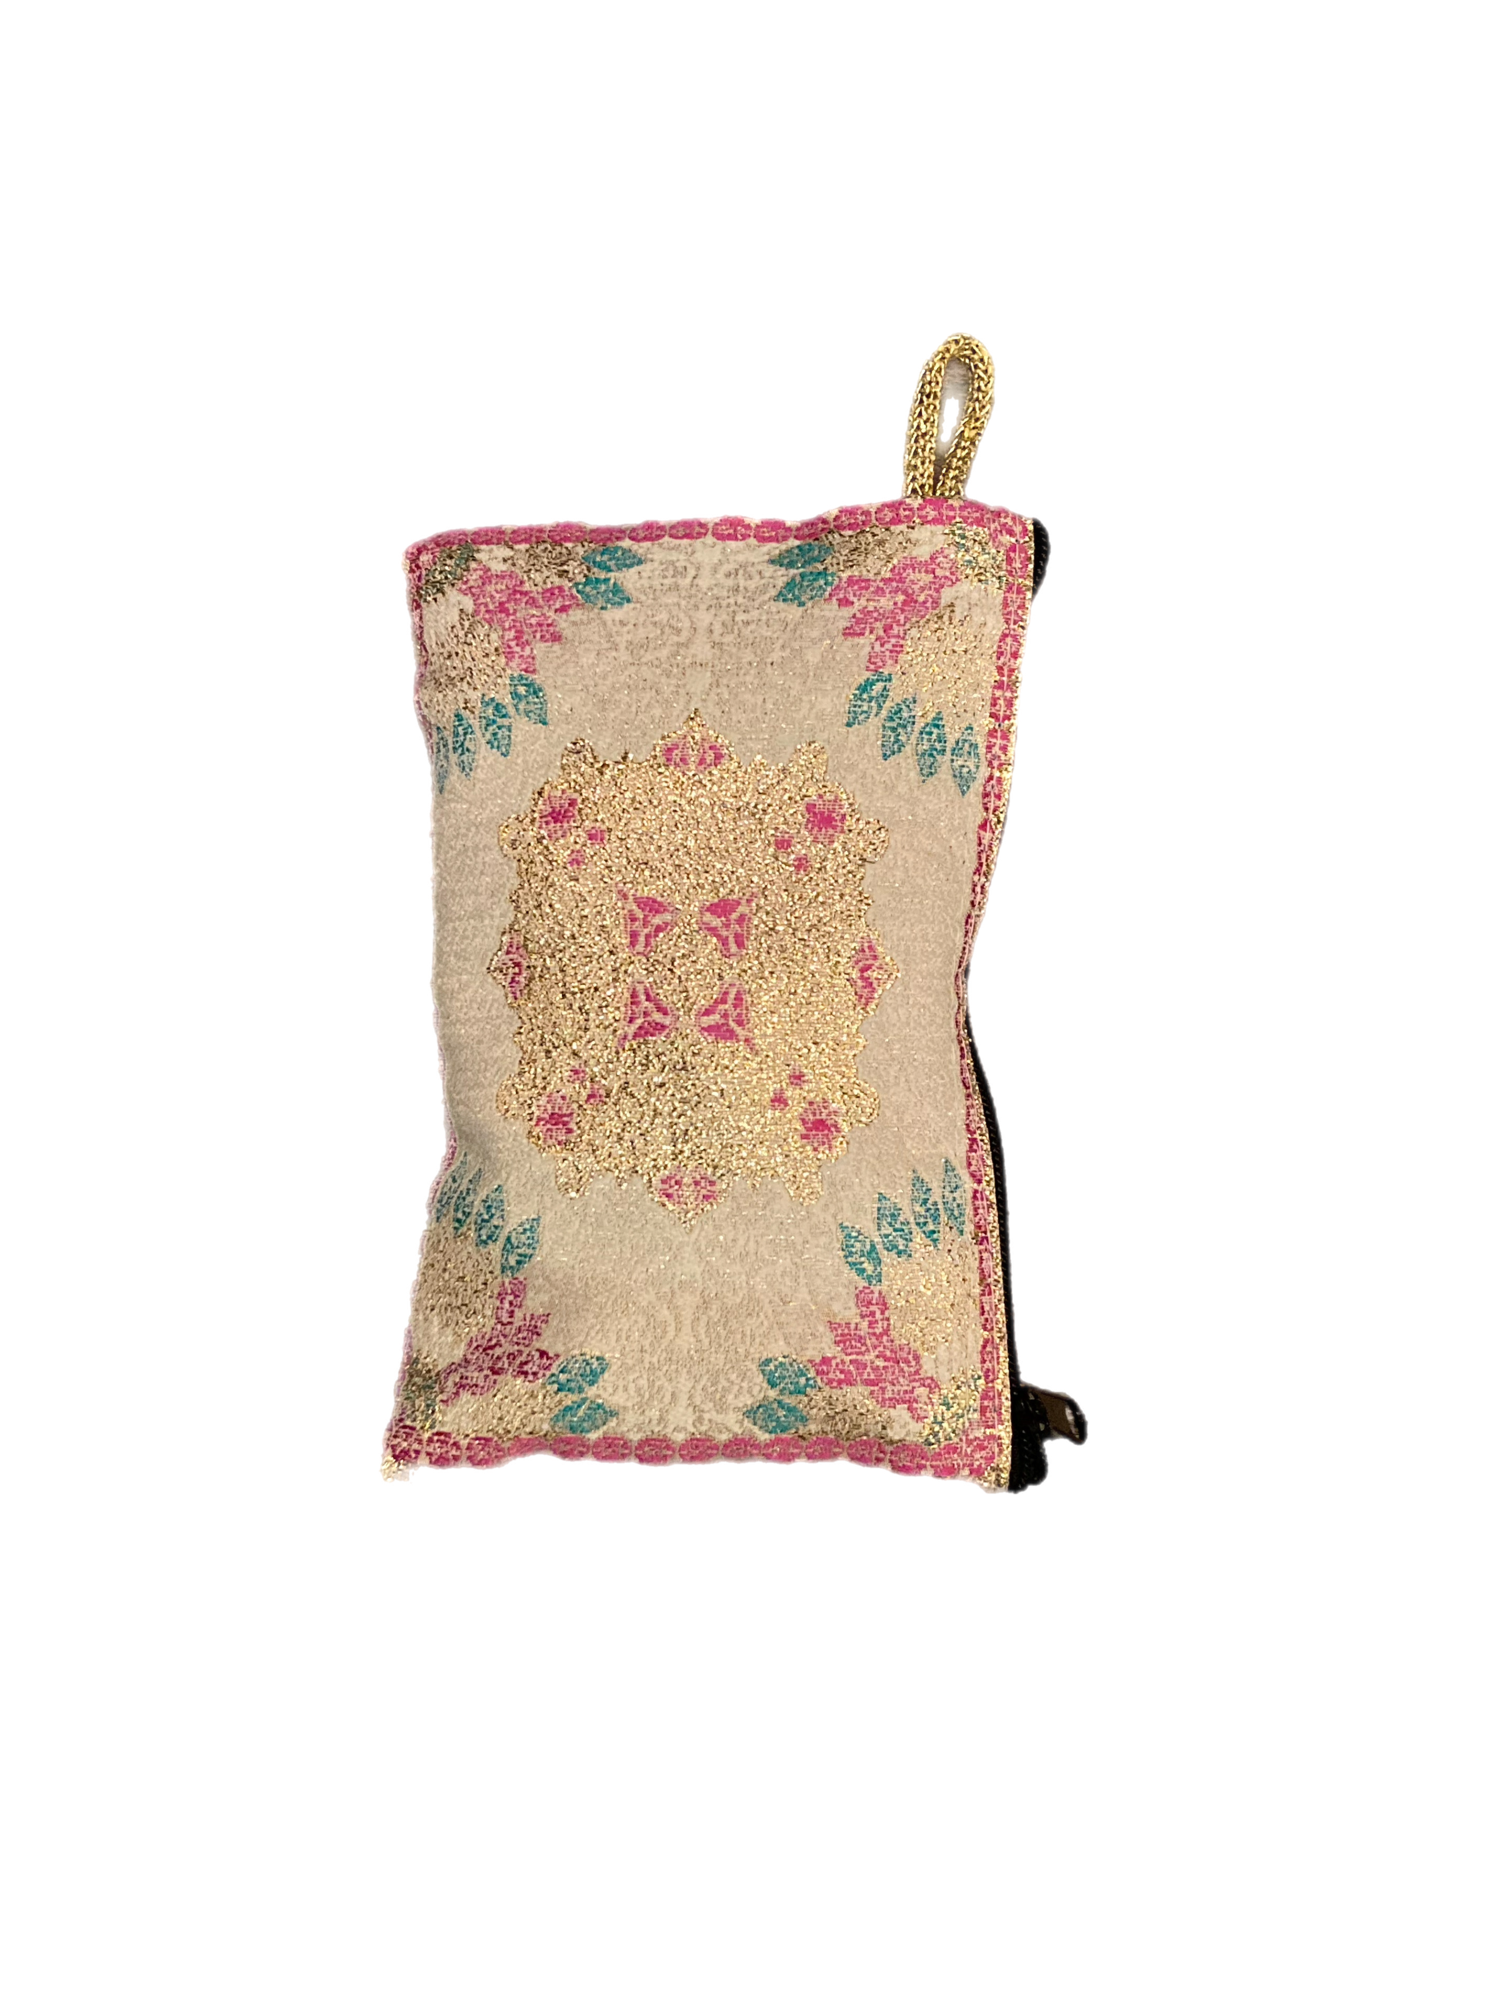 Ornate Pouch- Pink